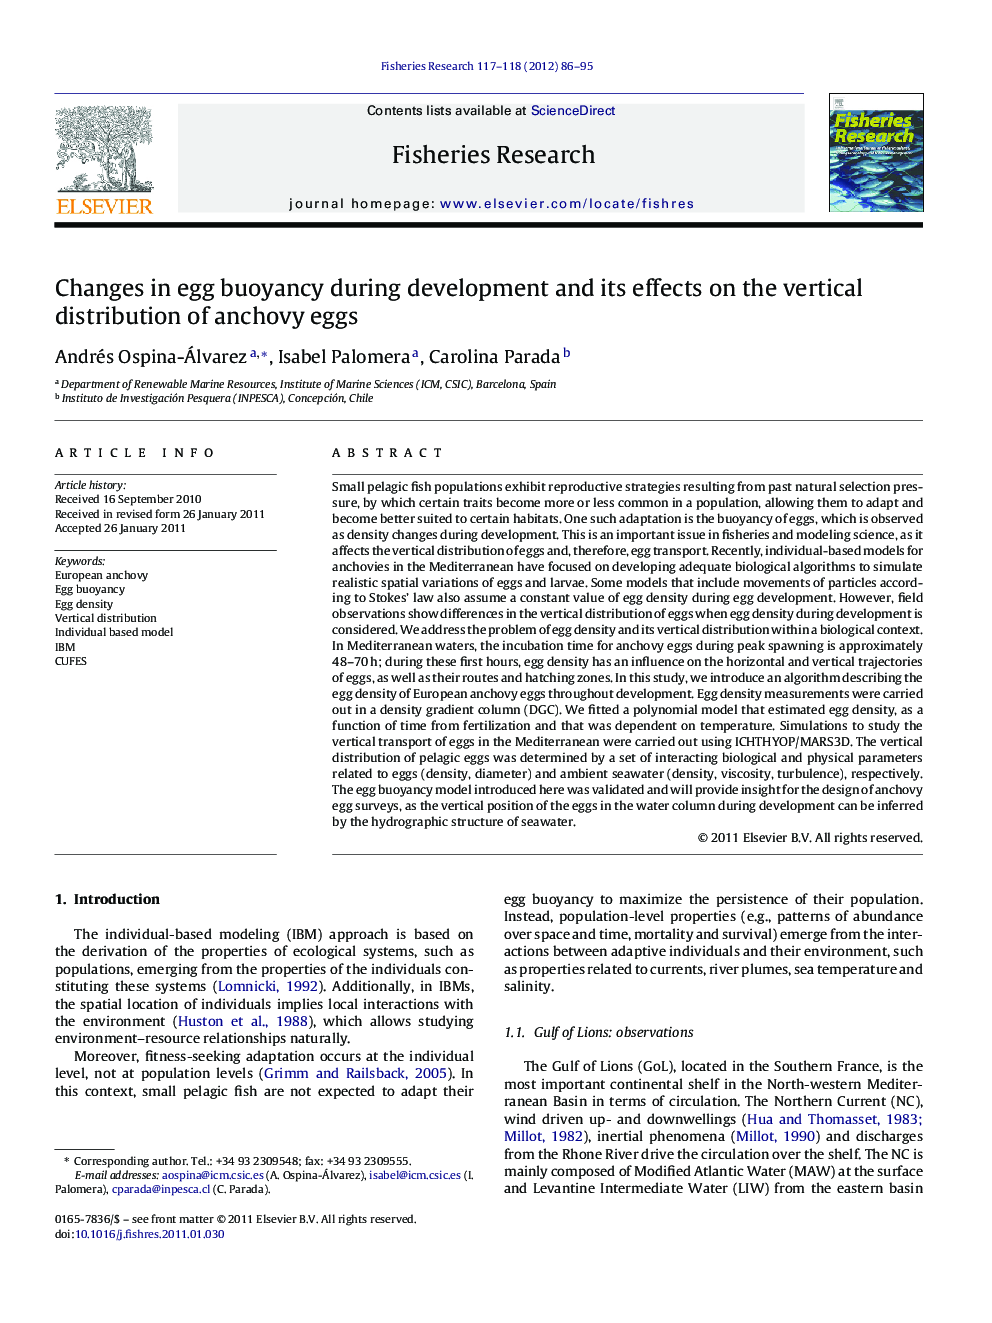 Changes in egg buoyancy during development and its effects on the vertical distribution of anchovy eggs